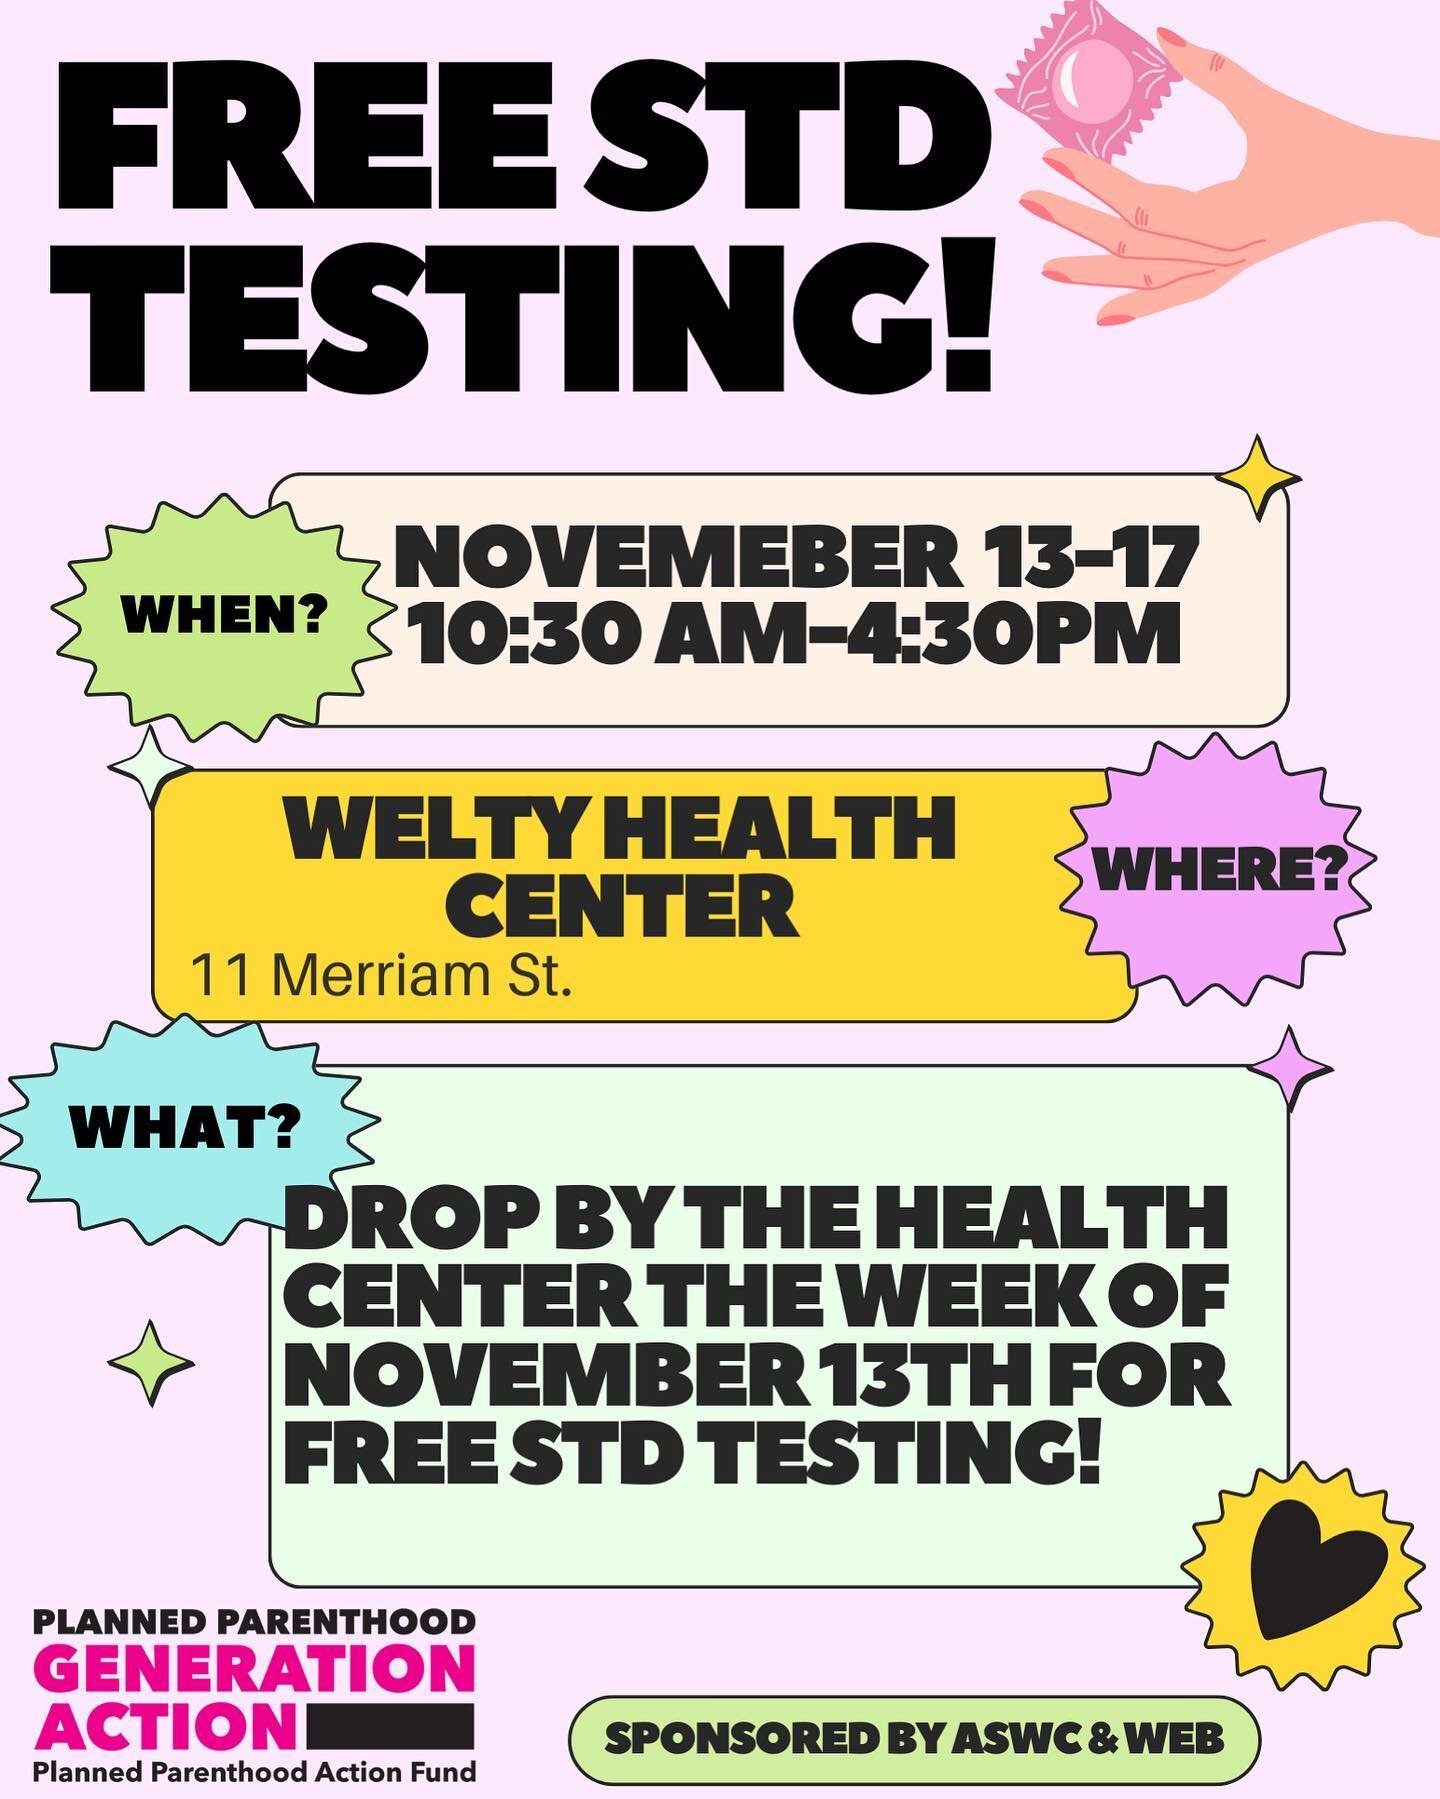 Starting tomorrow, free STD tests will be available at the Welty Health Center!